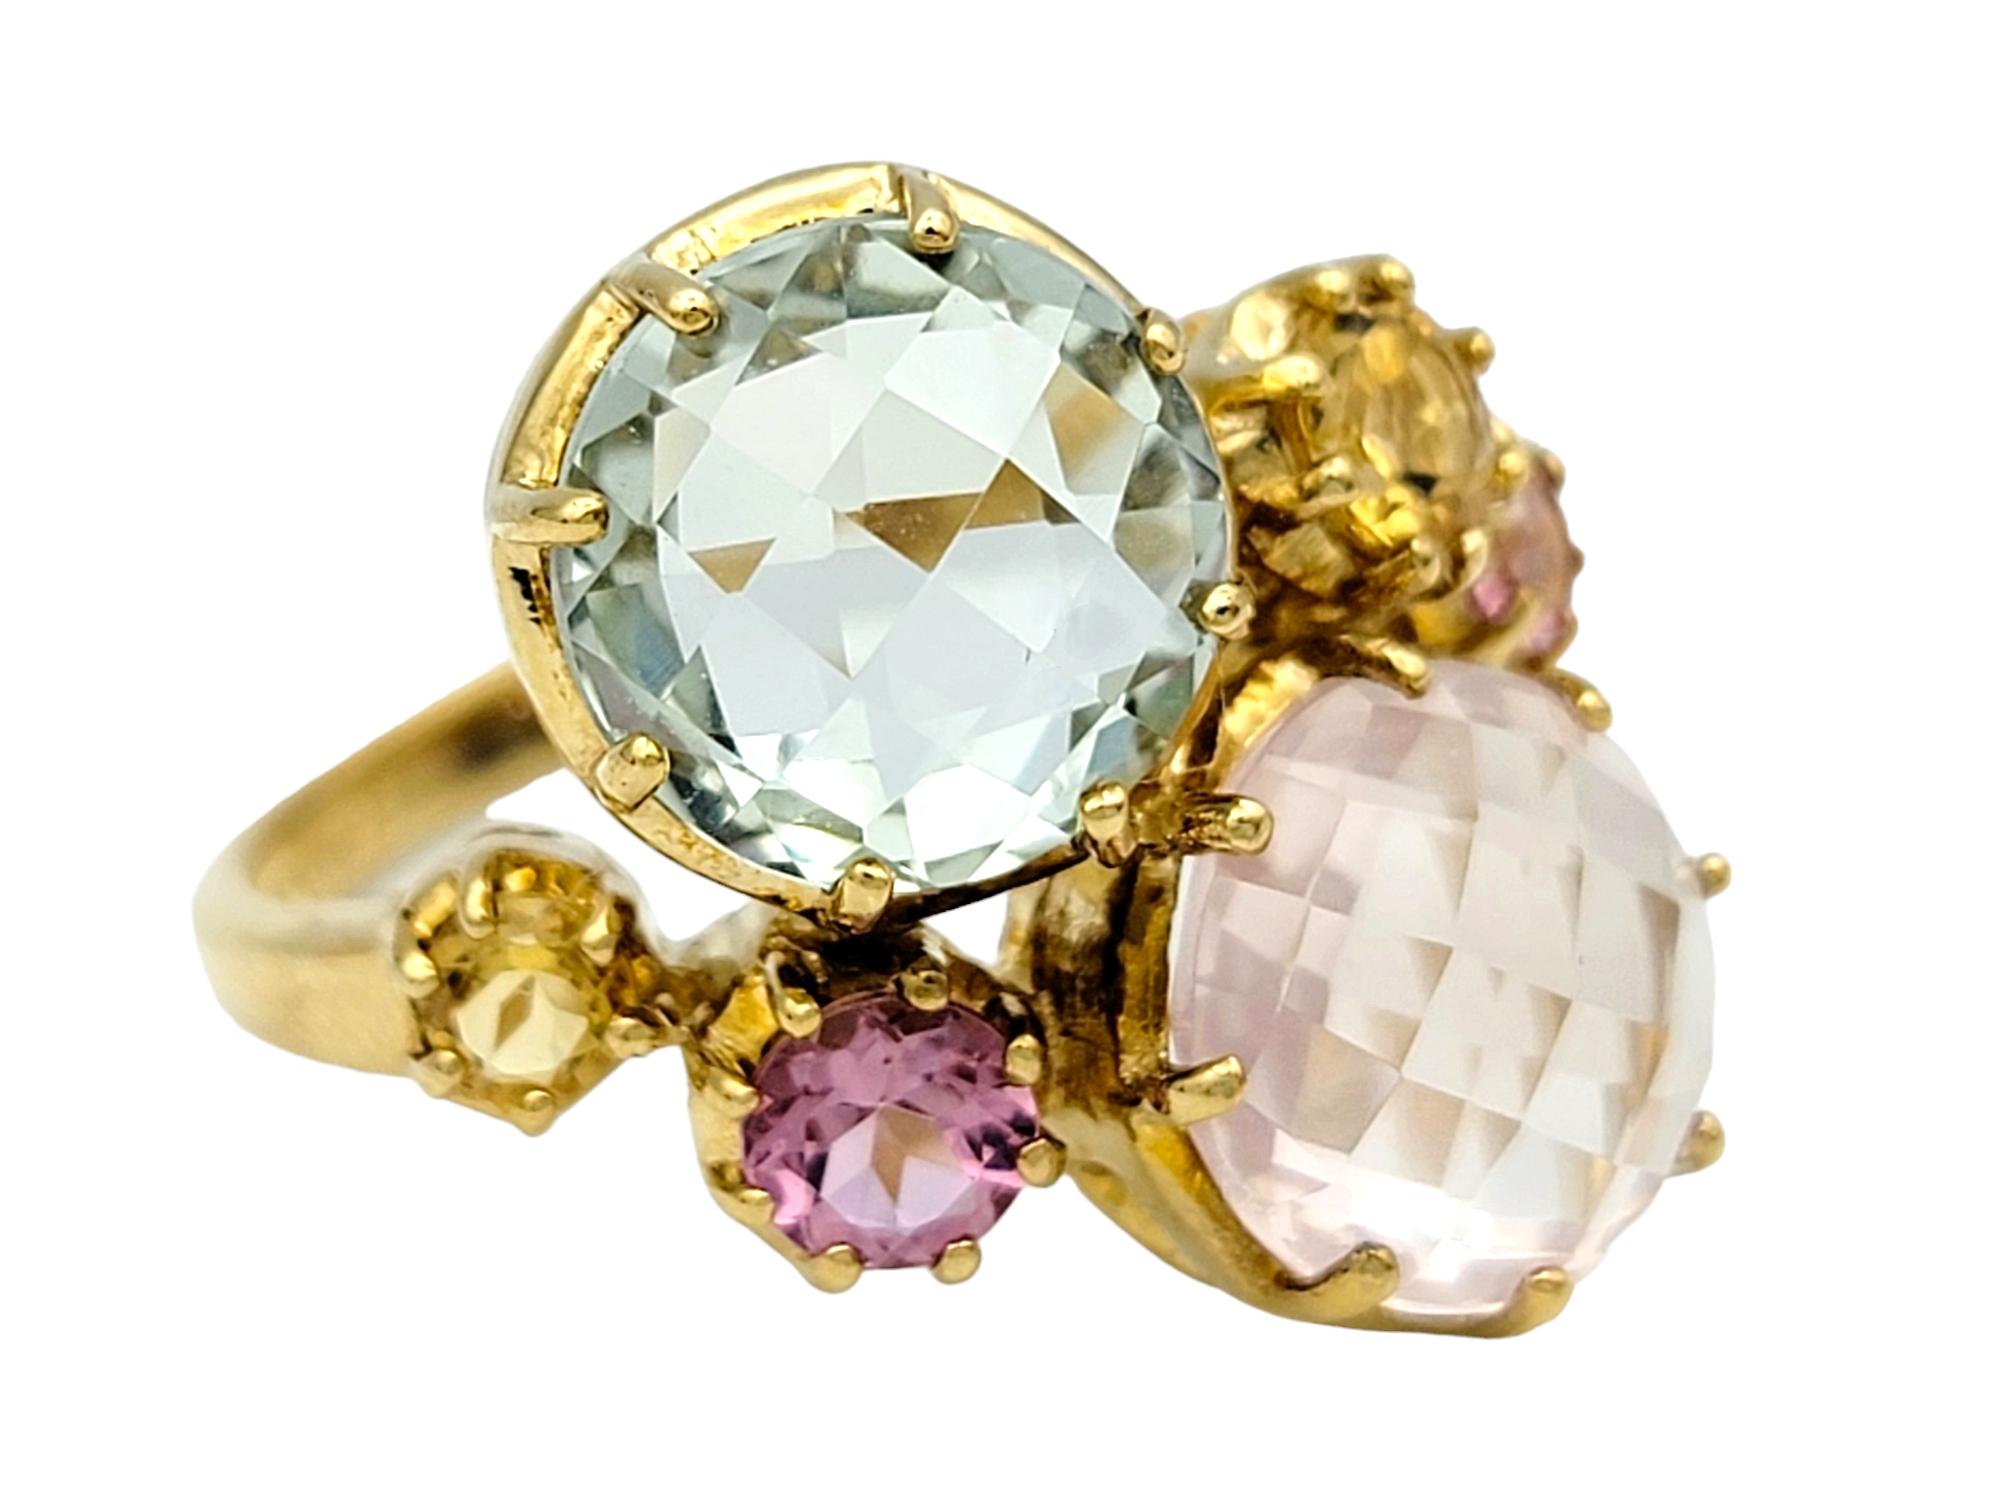 Contemporary Multi-Colored Quartz Gemstone Cluster Cocktail Ring Set in 10 Karat Yellow Gold For Sale